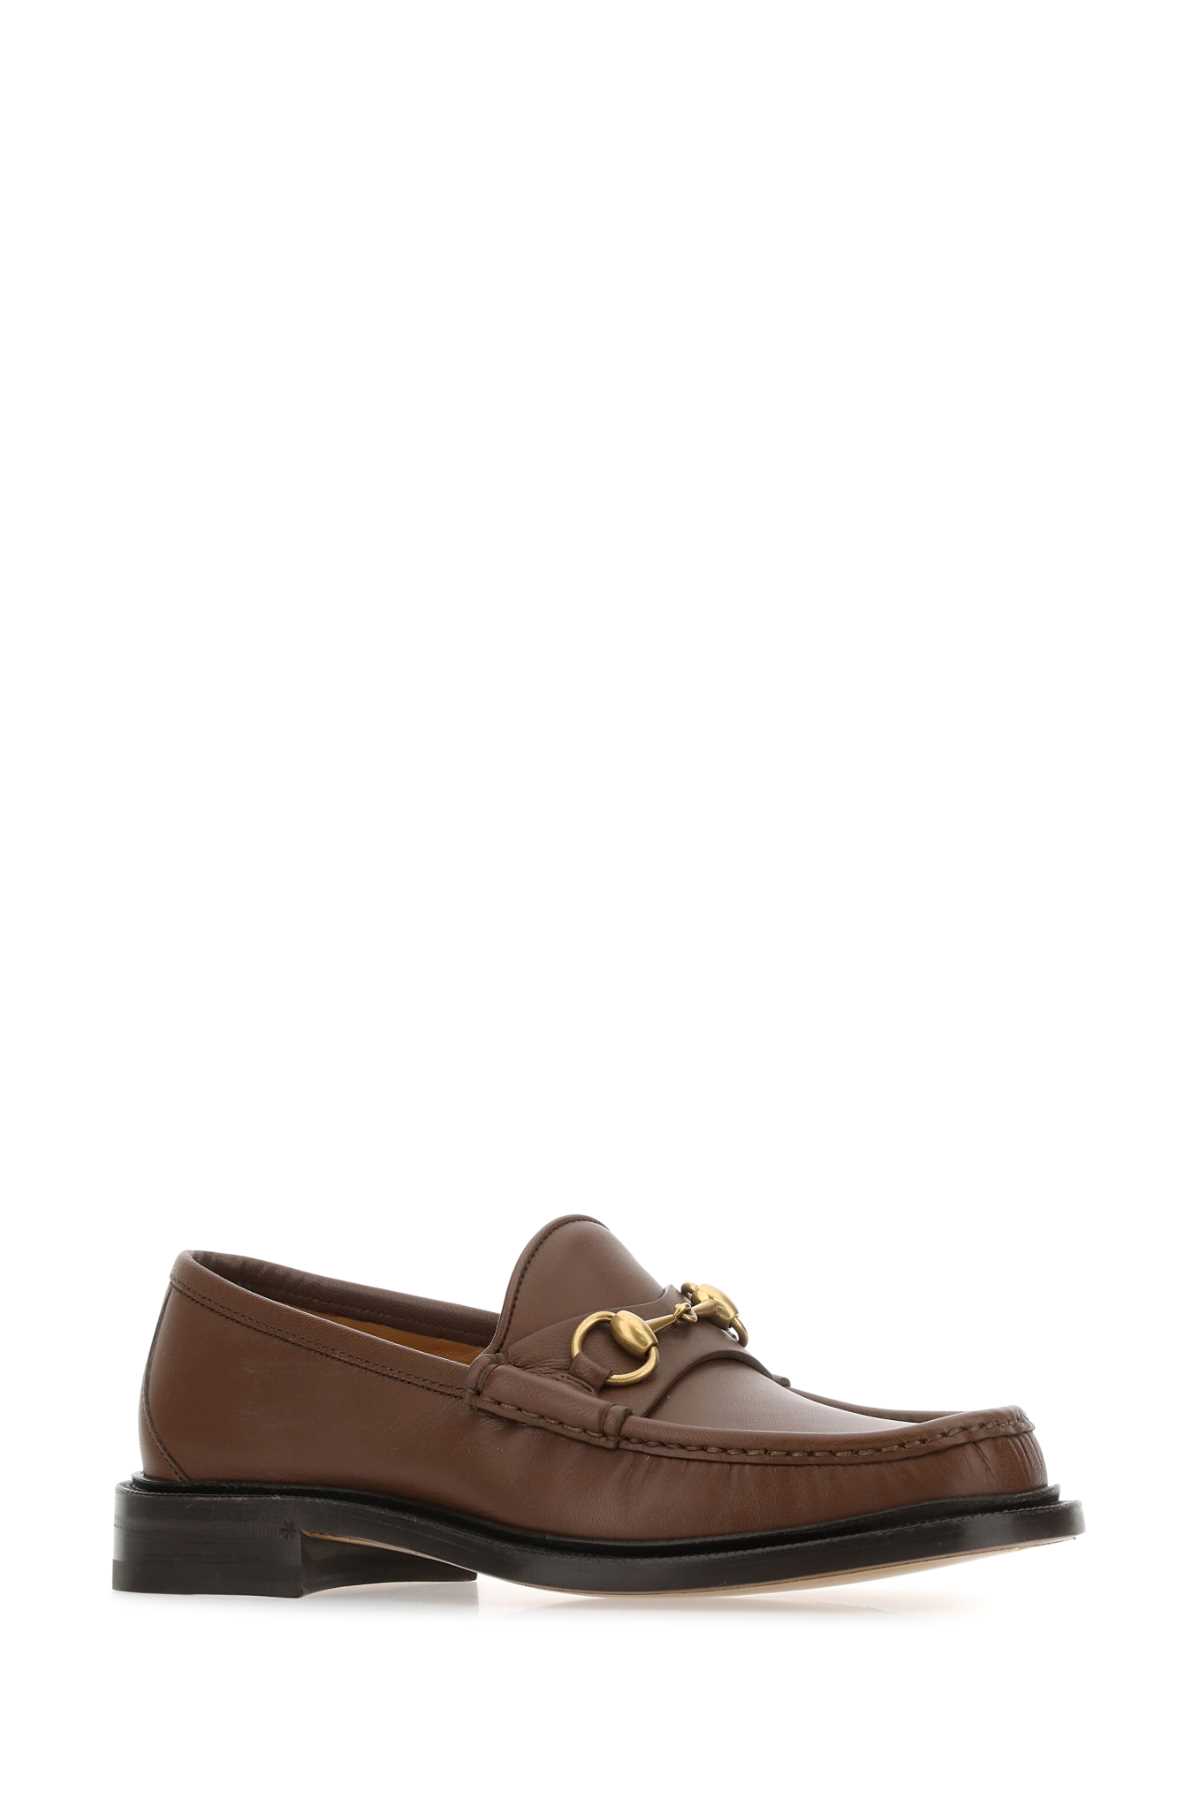 Shop Gucci Brown Leather Loafers